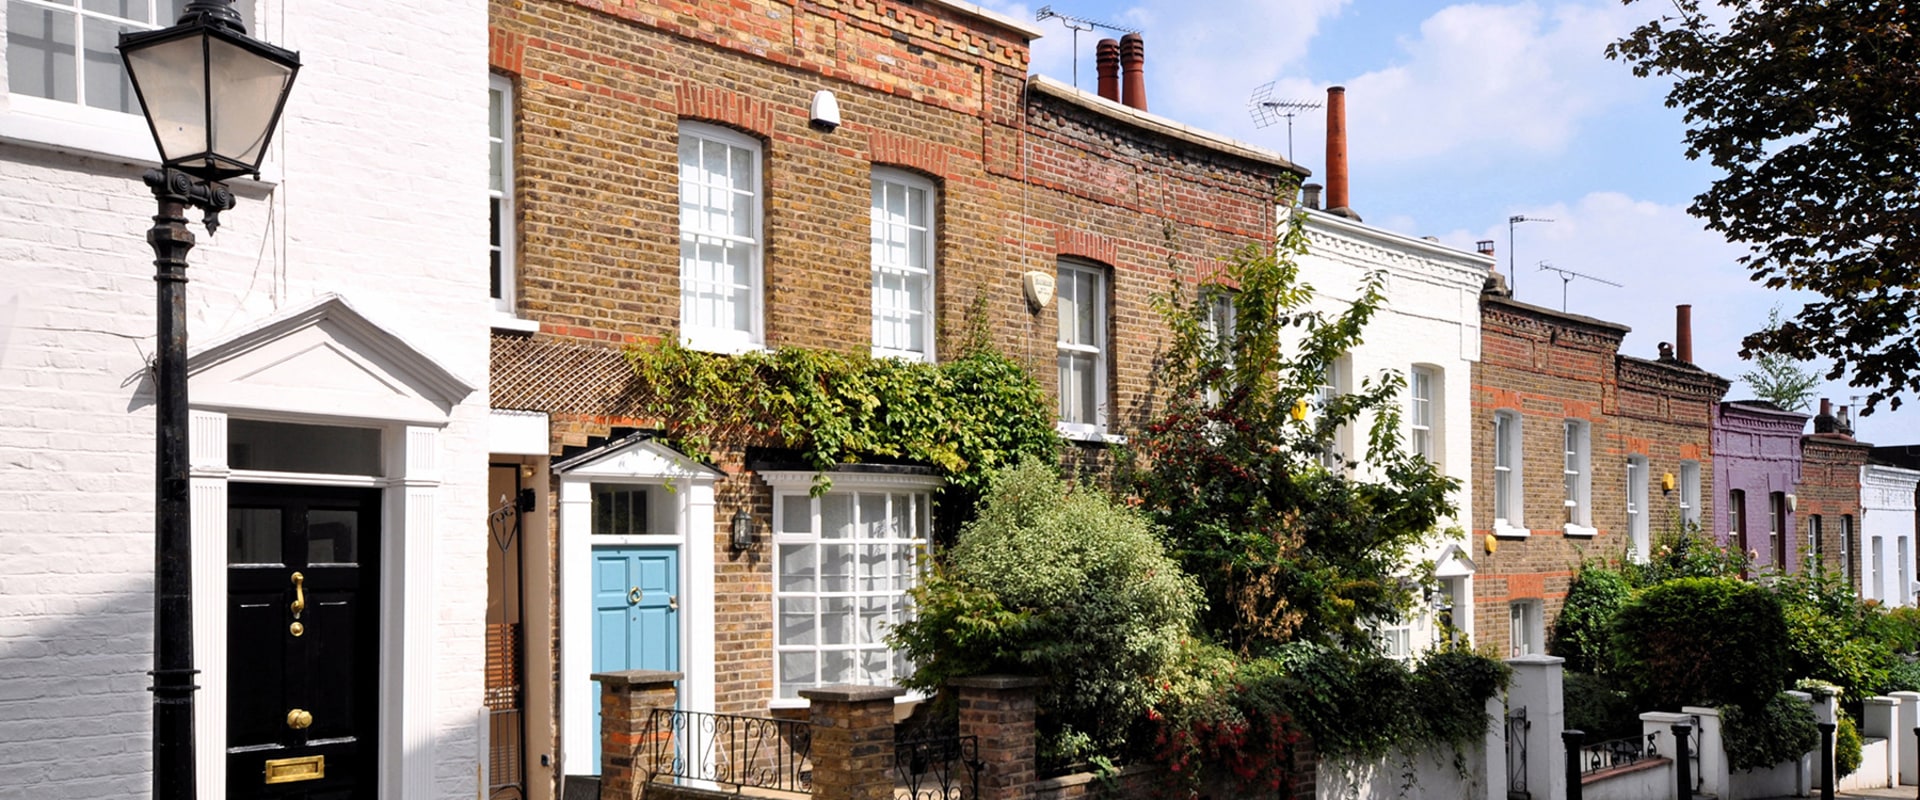 What is the Average Cost of a House in London?